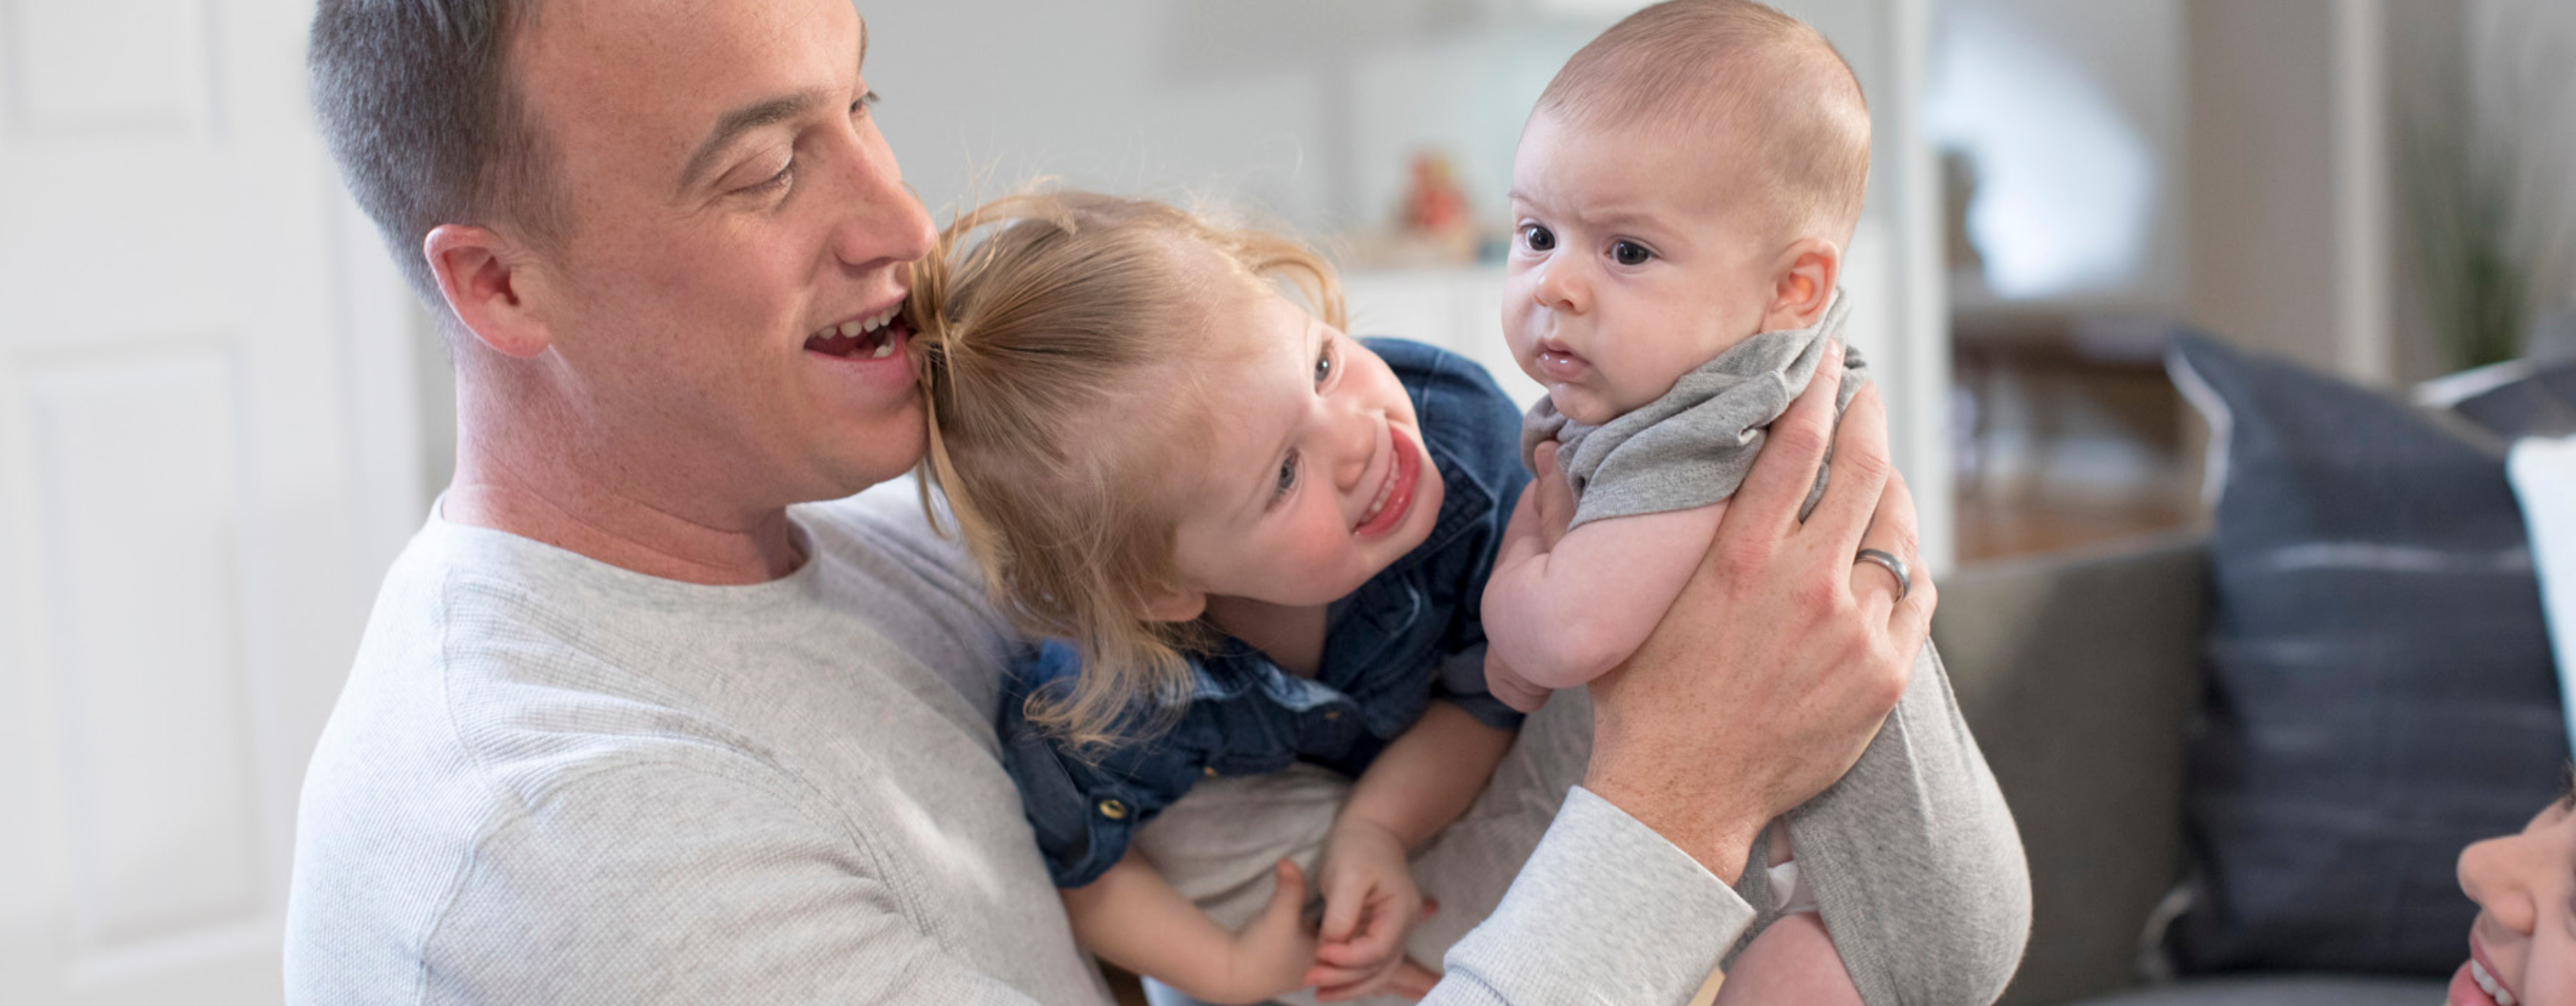 10 Ways Dads & Partners Can Support Breastfeeding – Lansinoh